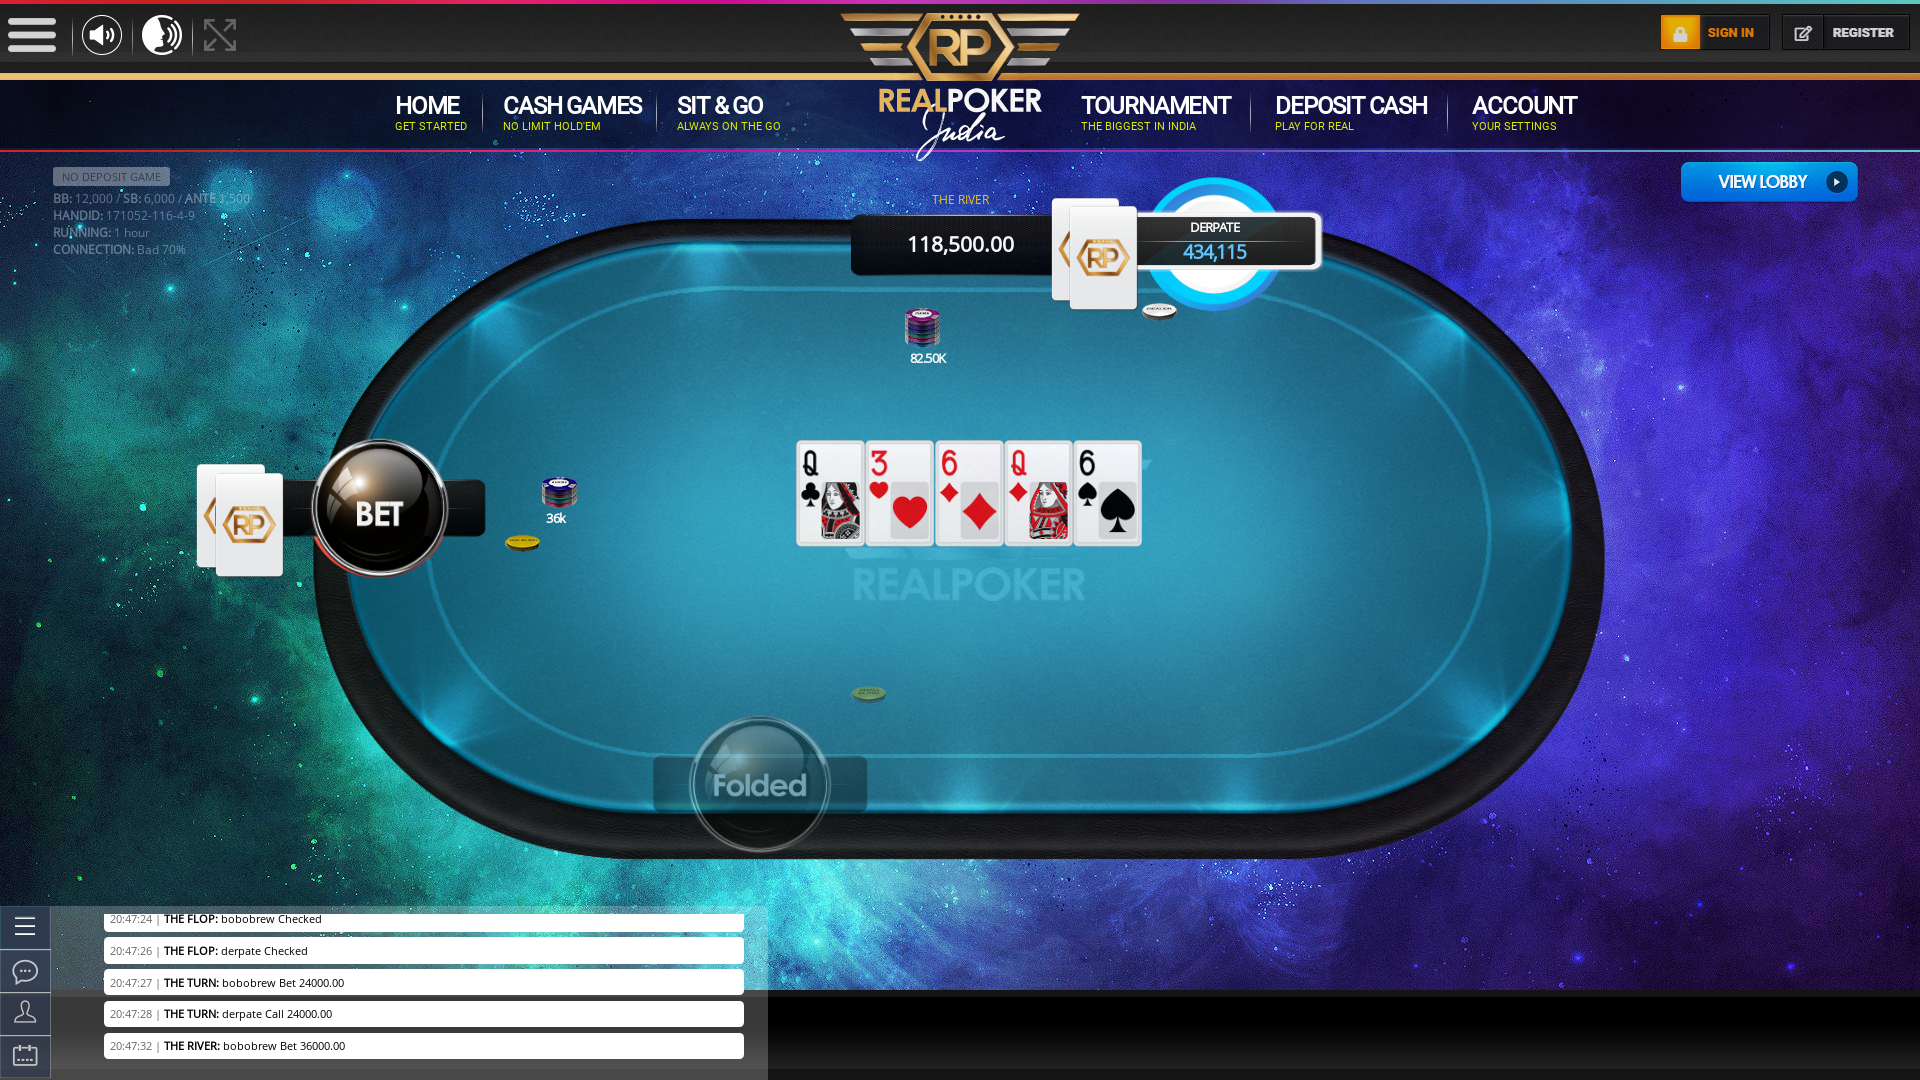 Goa online poker game on a 10 player table in the 90th minute of the game